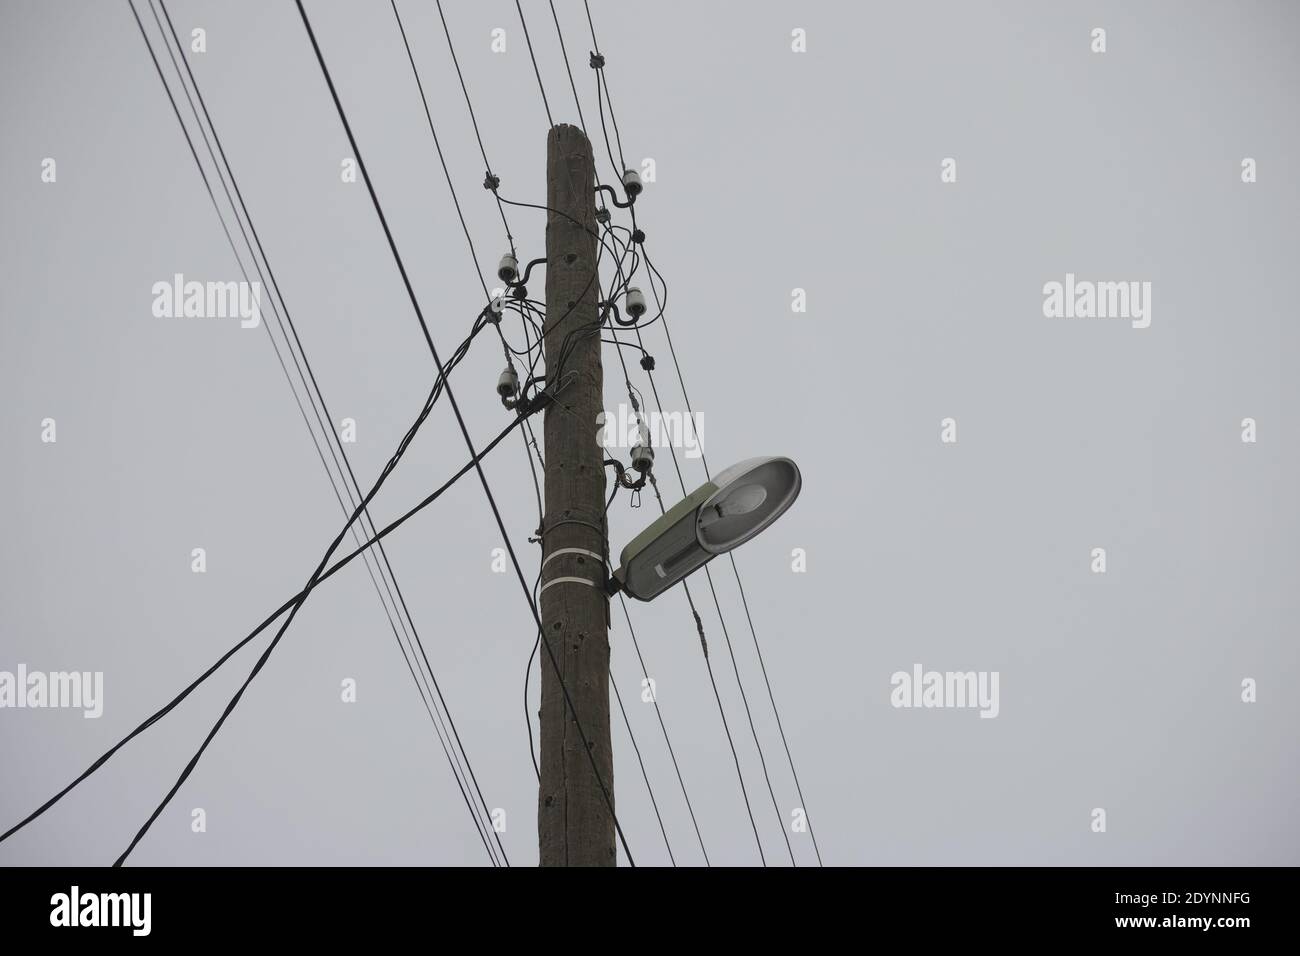 An old electric wooden pole with a lamp and electricity cables hanging on it. Stock Photo